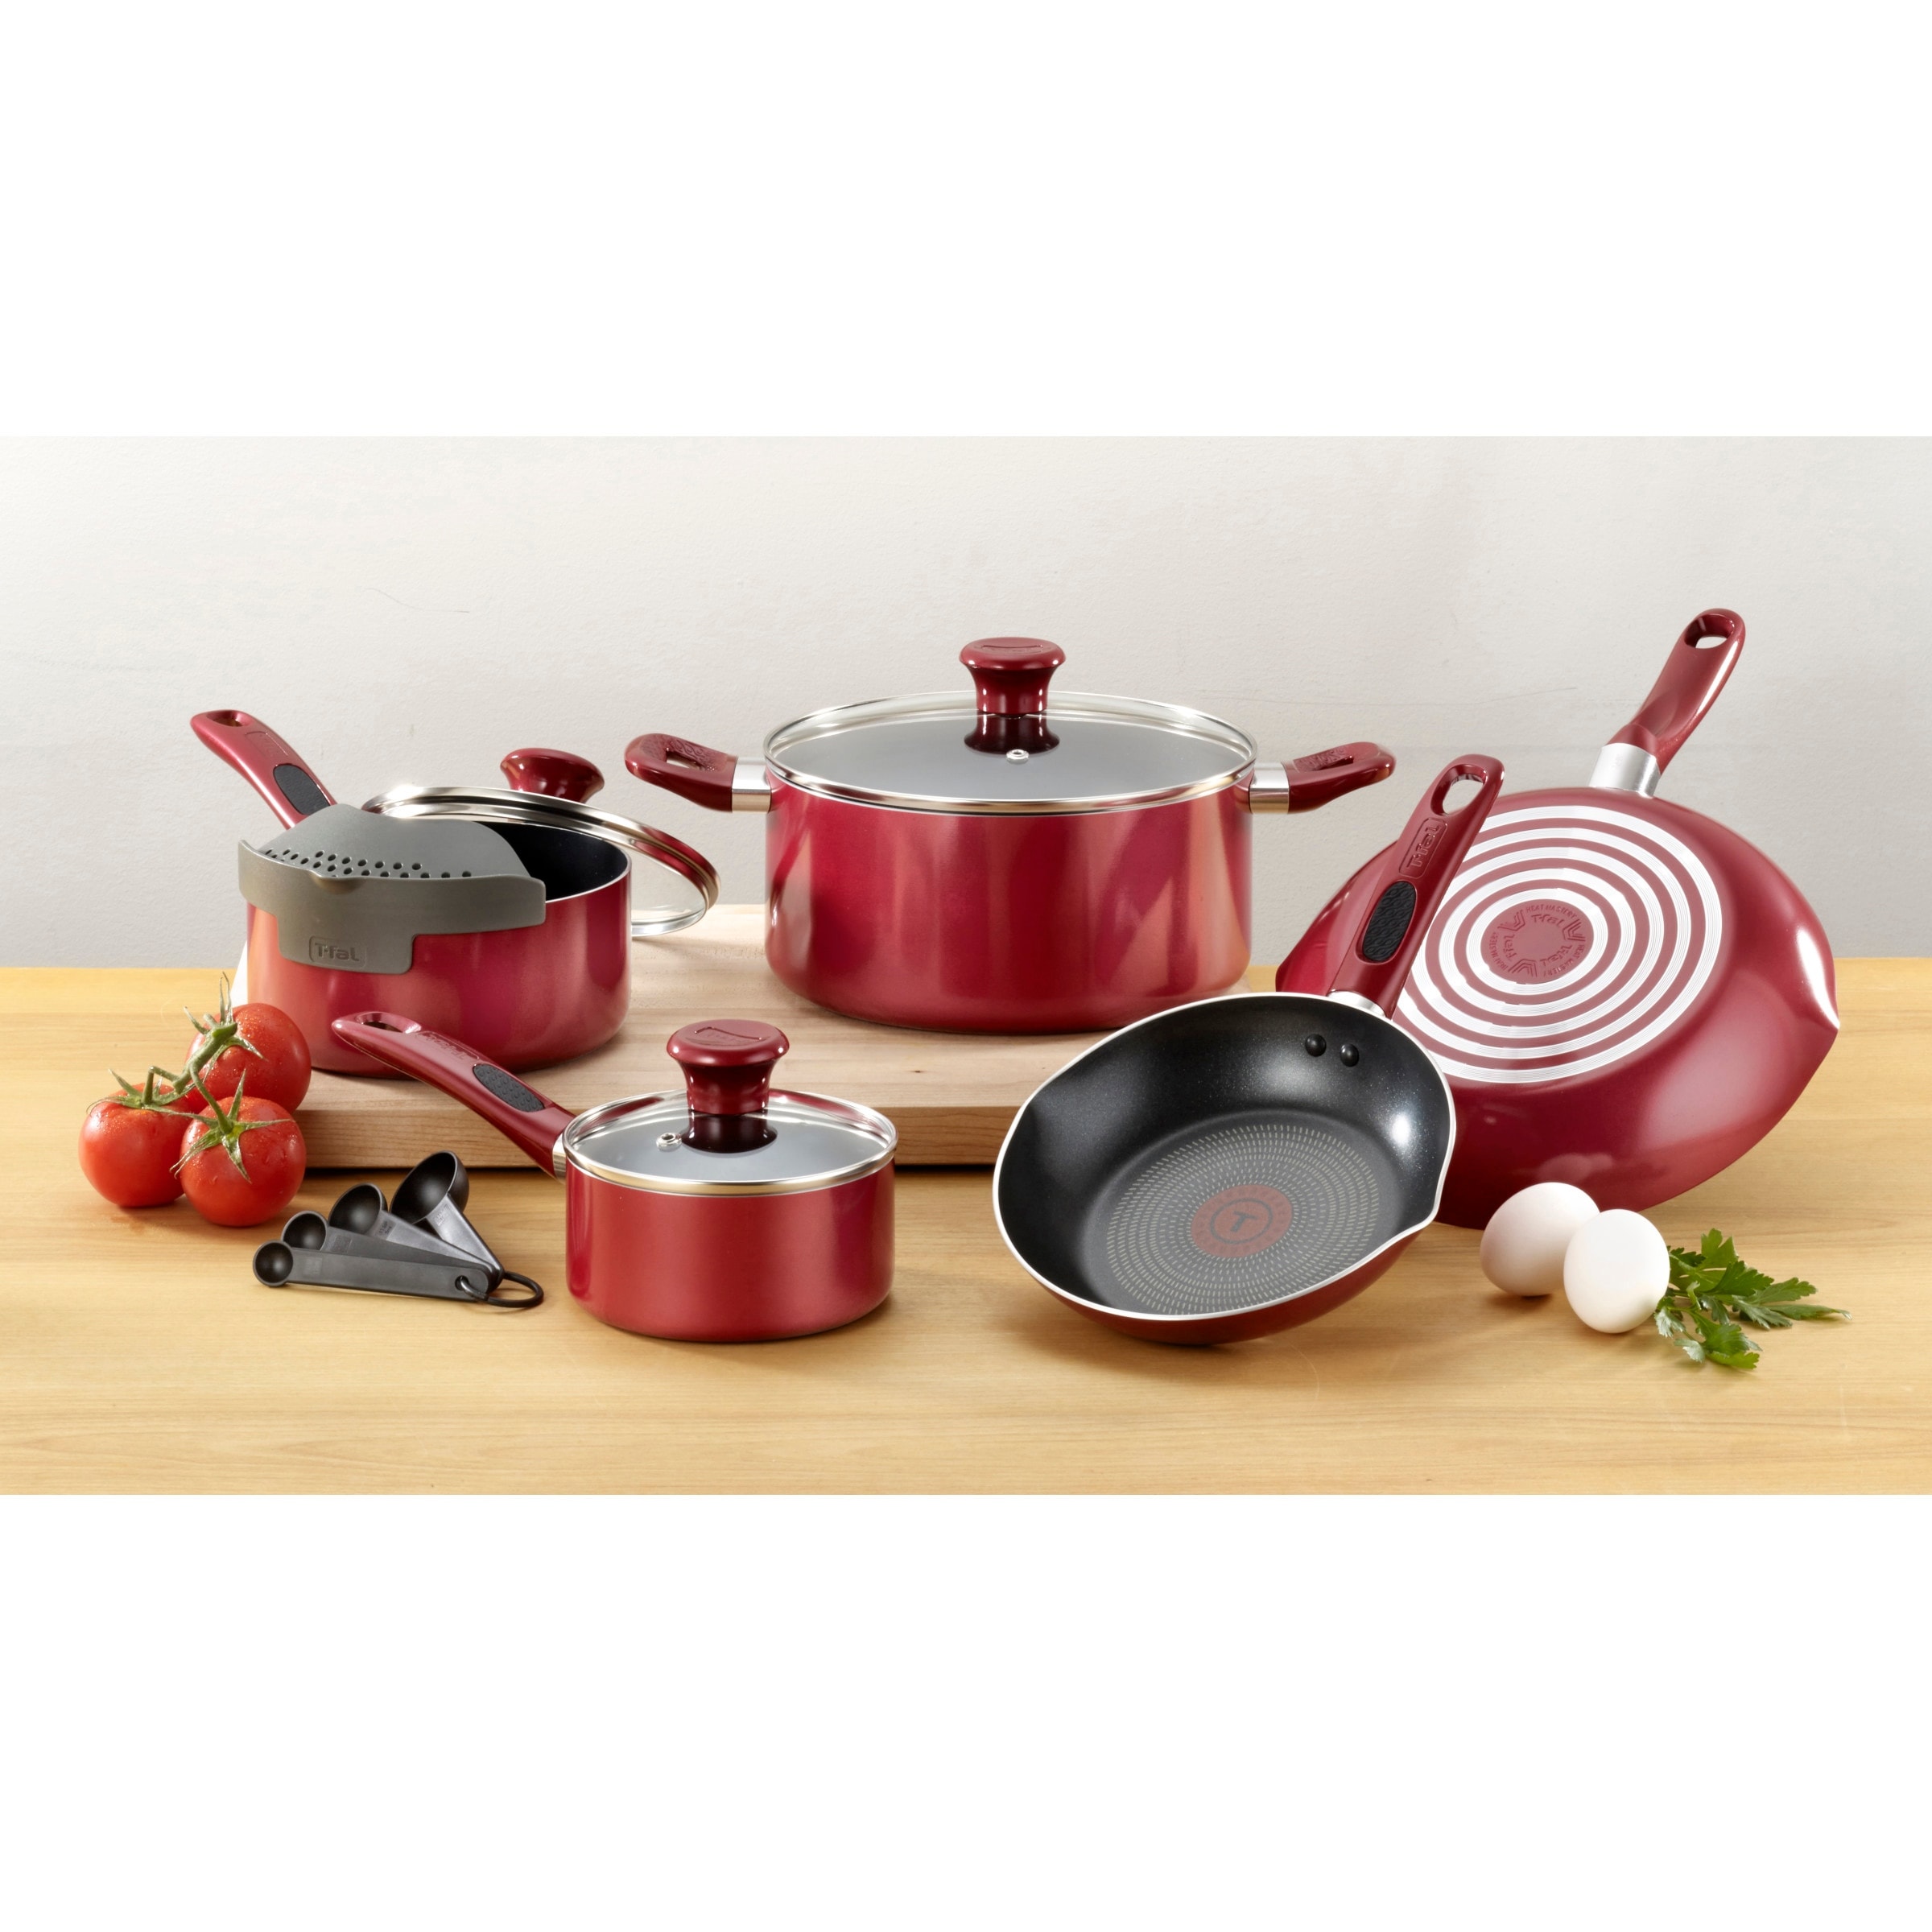 T-Fal Easy Care Nonstick Cookware, 12 Piece Set, Red, B089SC64